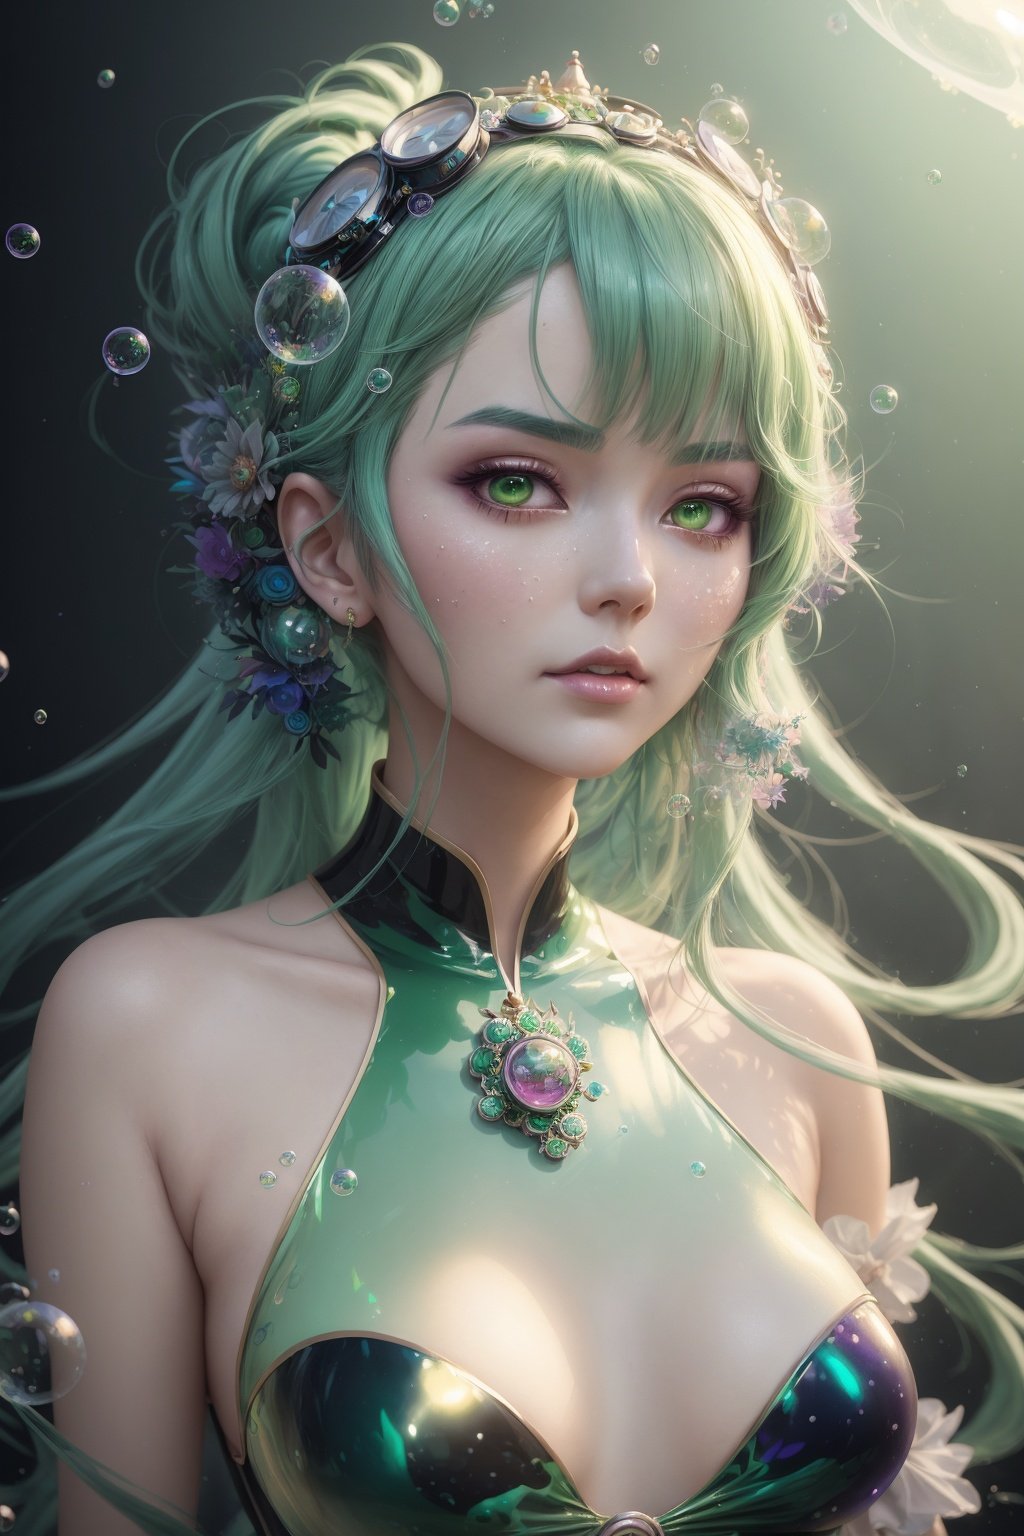 a woman with green hair is surrounded by bubbles, inspired by Yanjun Cheng, fantasy art, pop japonisme 3 d ultra detailed, fantasy victorian art, style hybrid mix of beeple, sakimichan frank franzzeta, underwater face, rossdraws 1. 0, stylized 3 d, beeple and jeremiah ketner